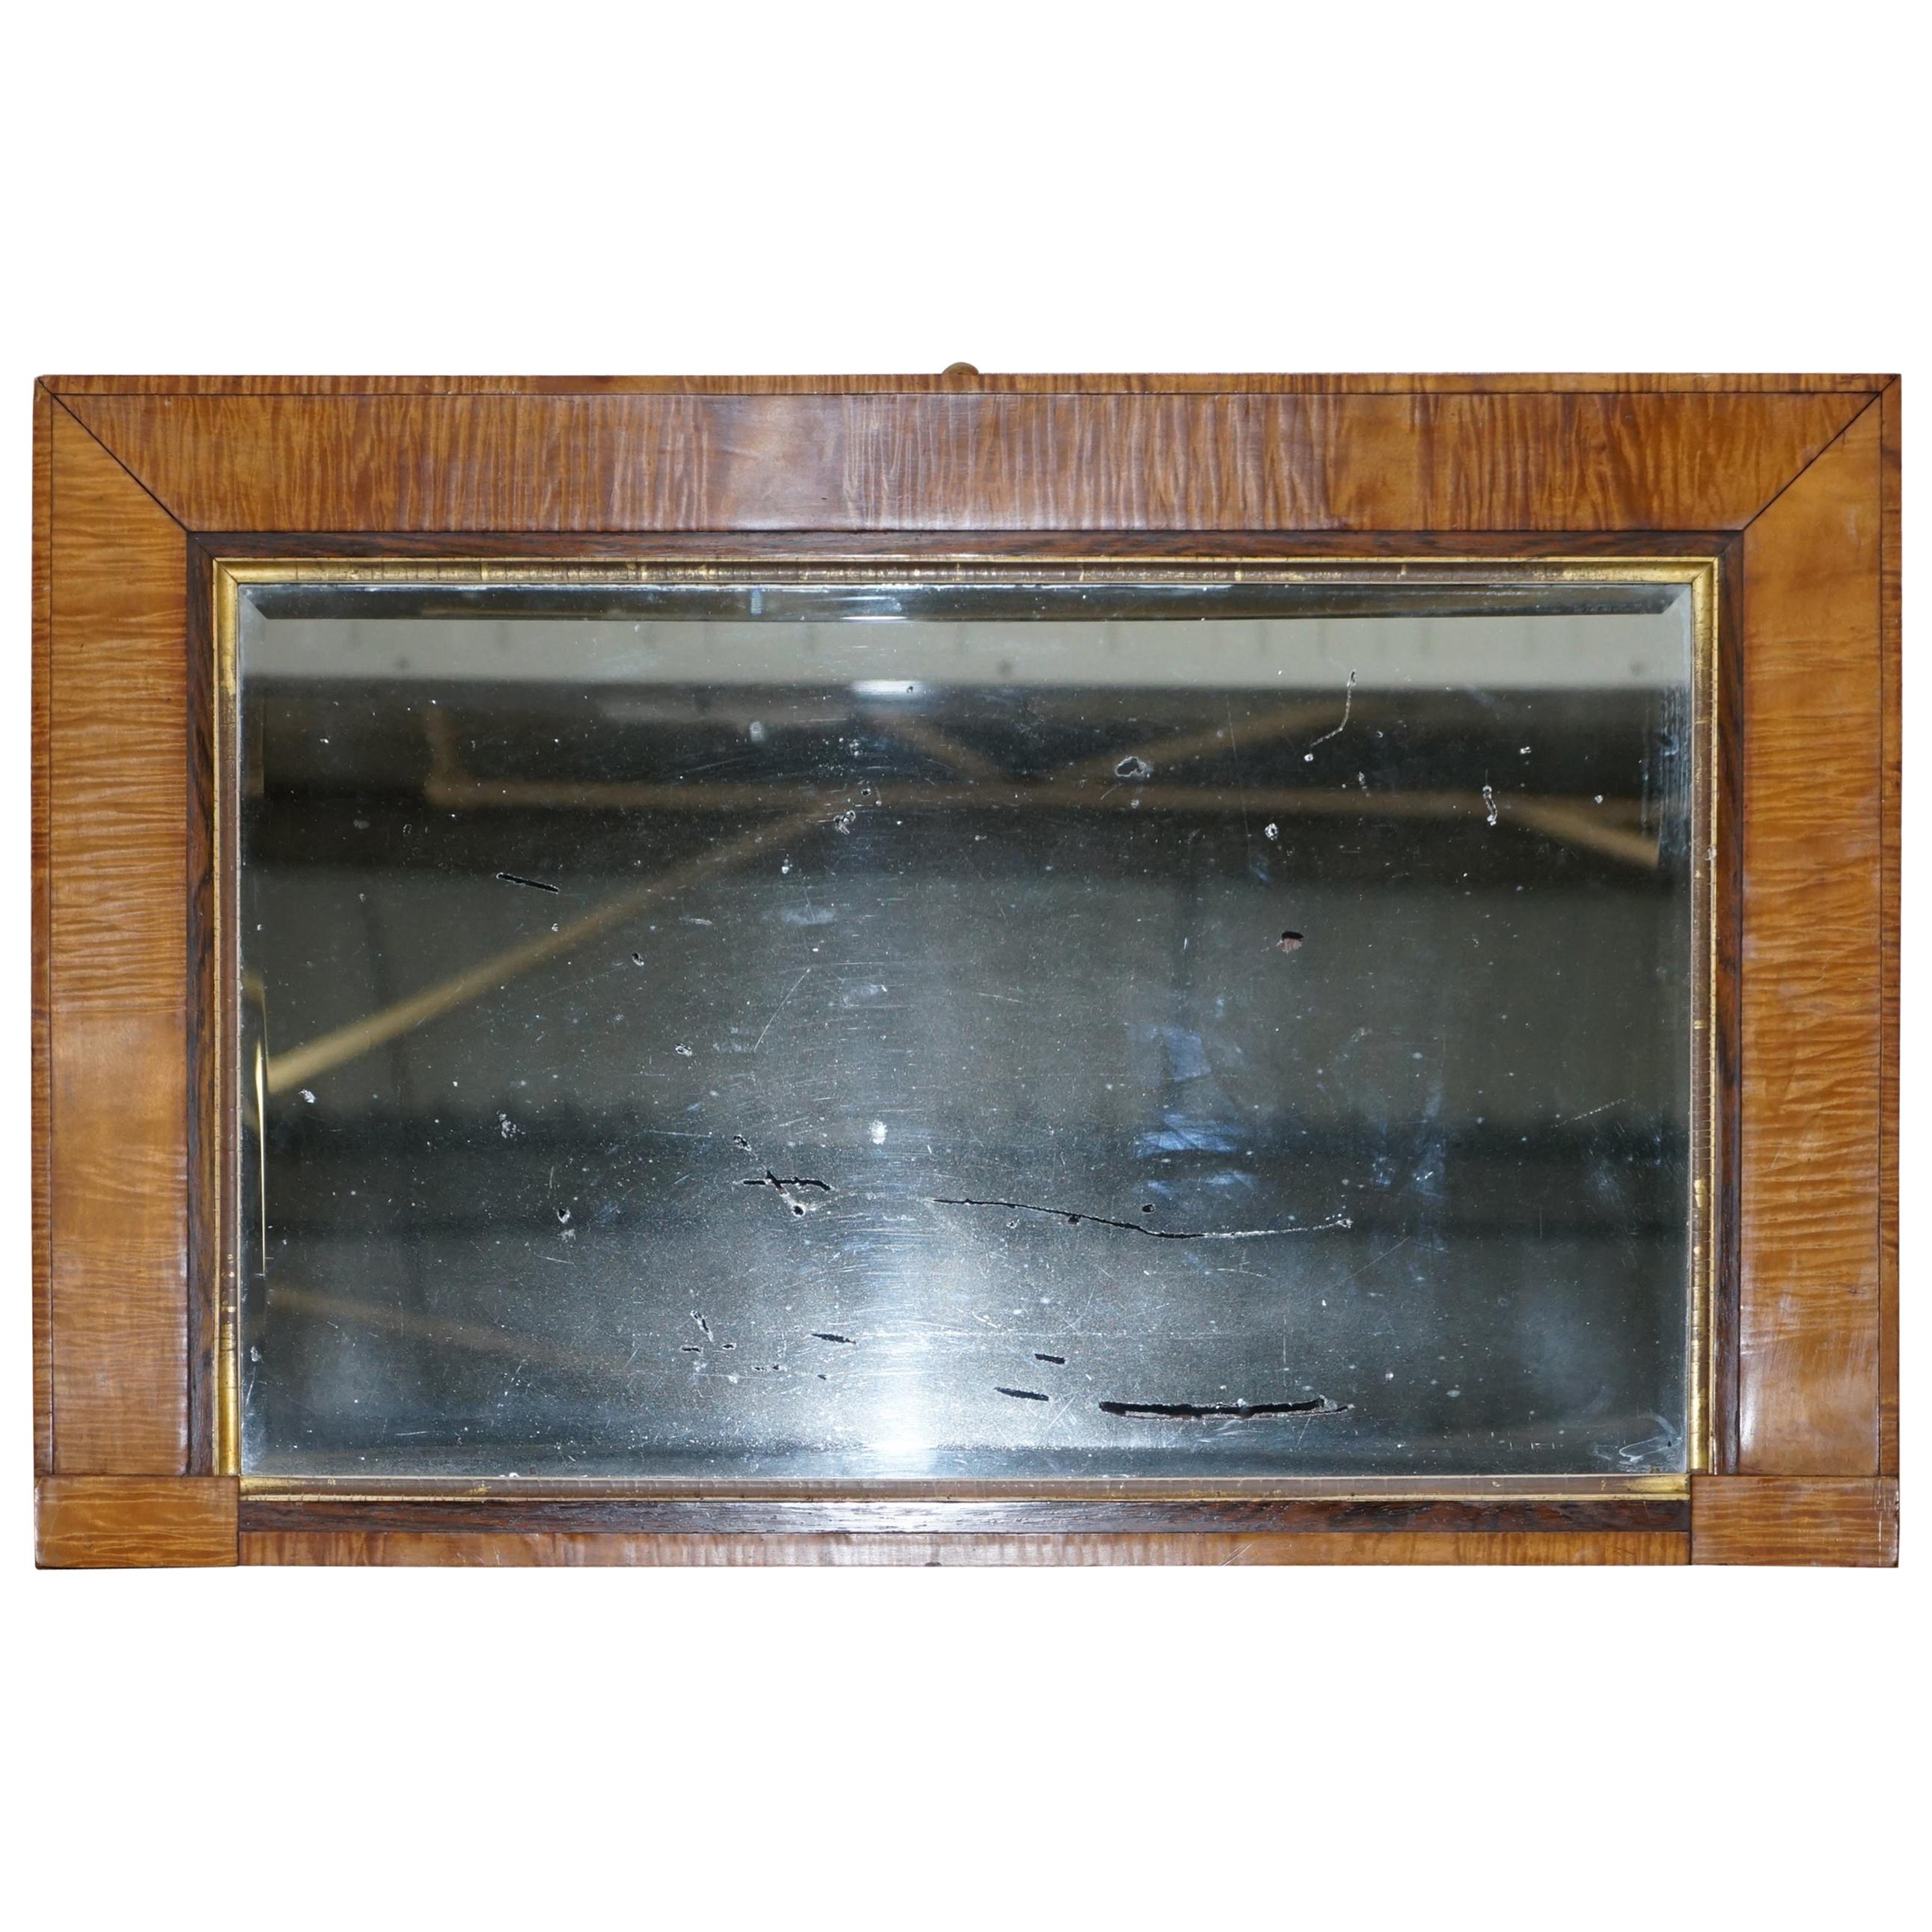 Victorian Maple Framed Wall Mirror Lovely Bevelled Timber and Distressed Glass For Sale